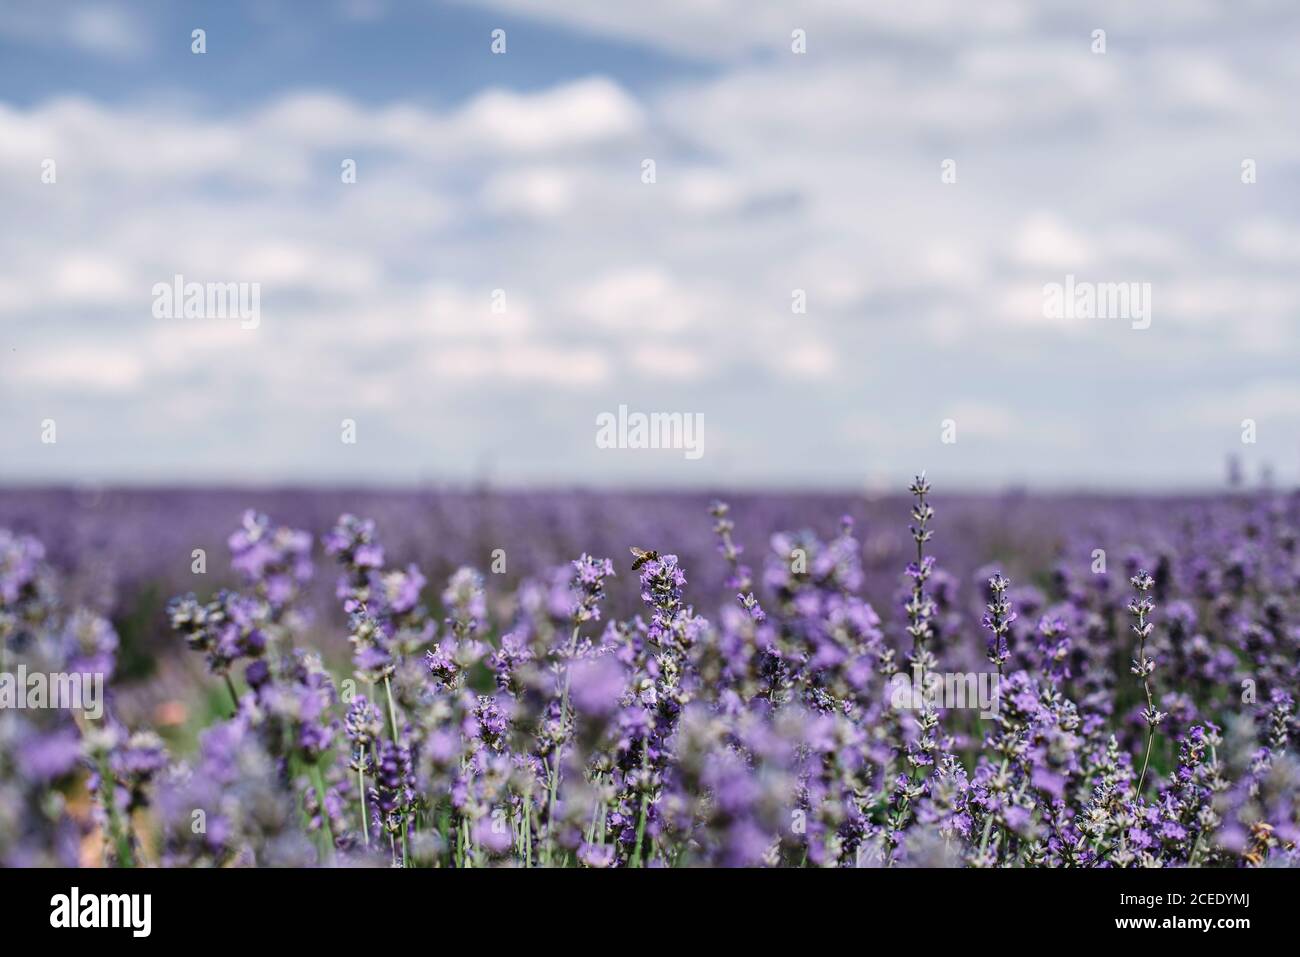 Bush with violet flowers in field Stock Photo